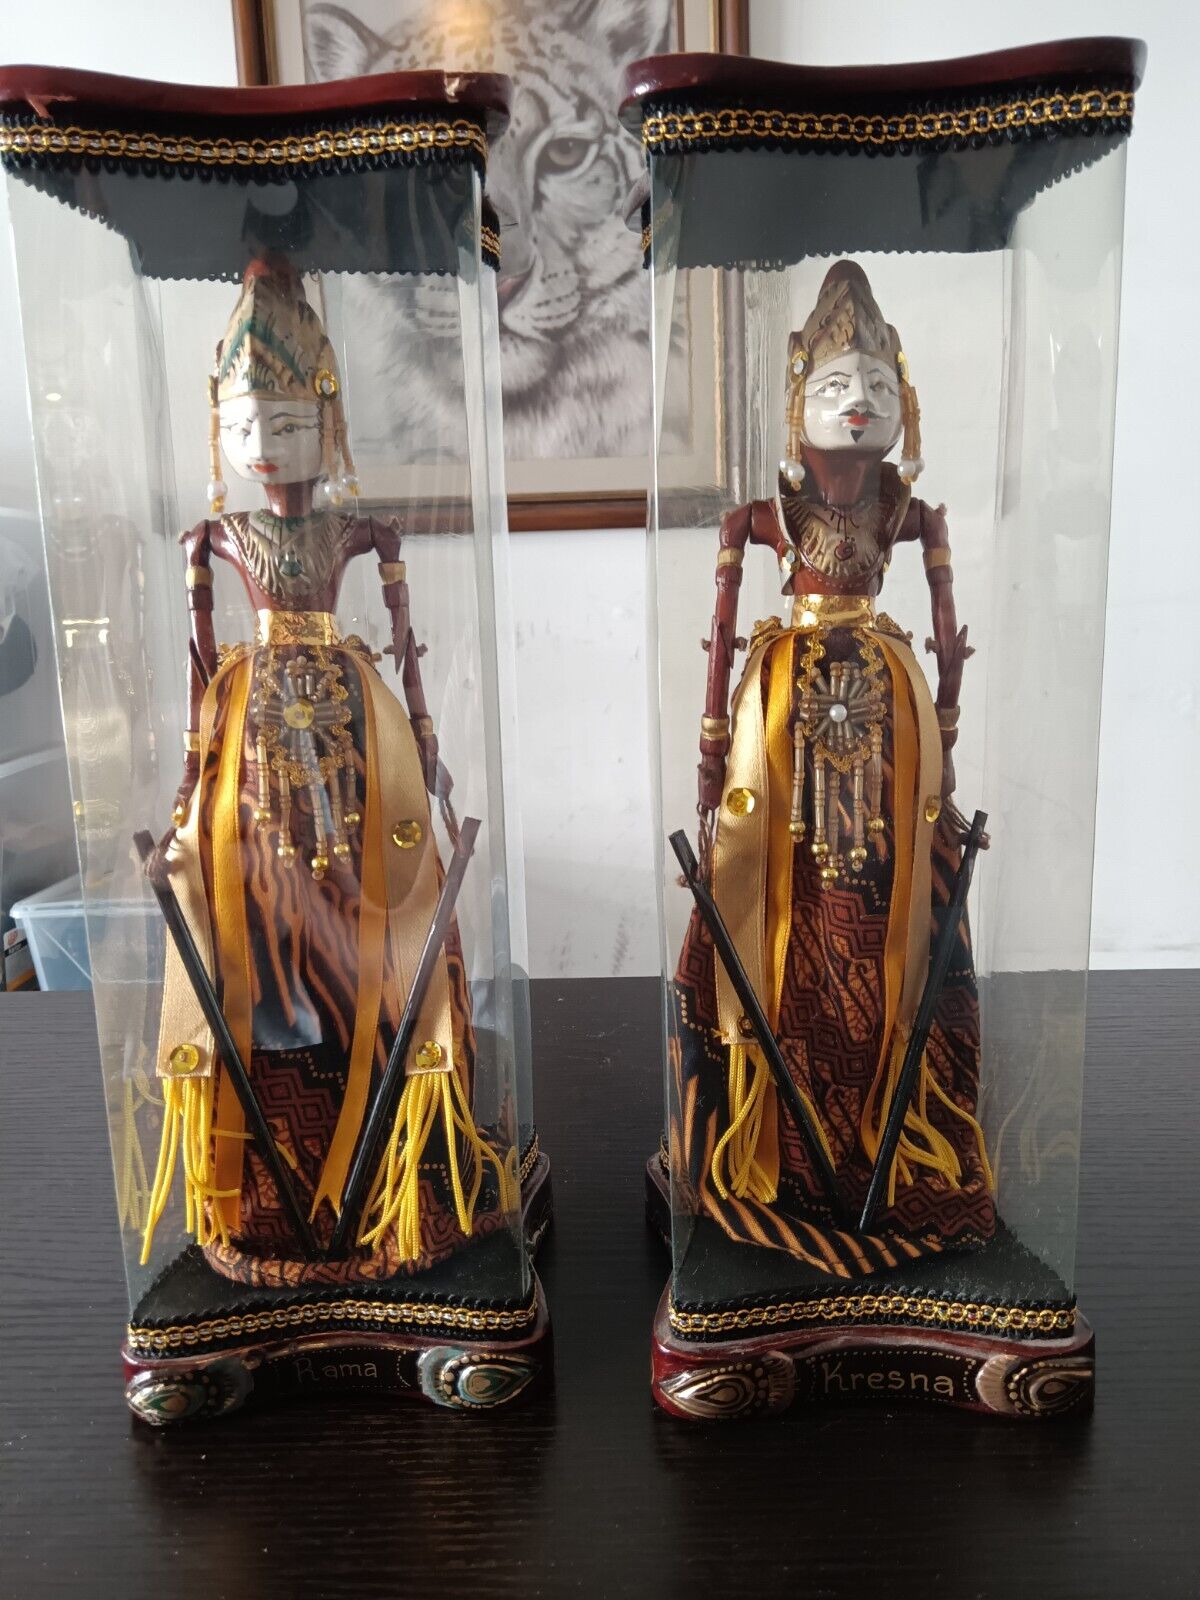 Rare Vintage King Rama and  Kresna Puppet Doll In Box Never Removed.